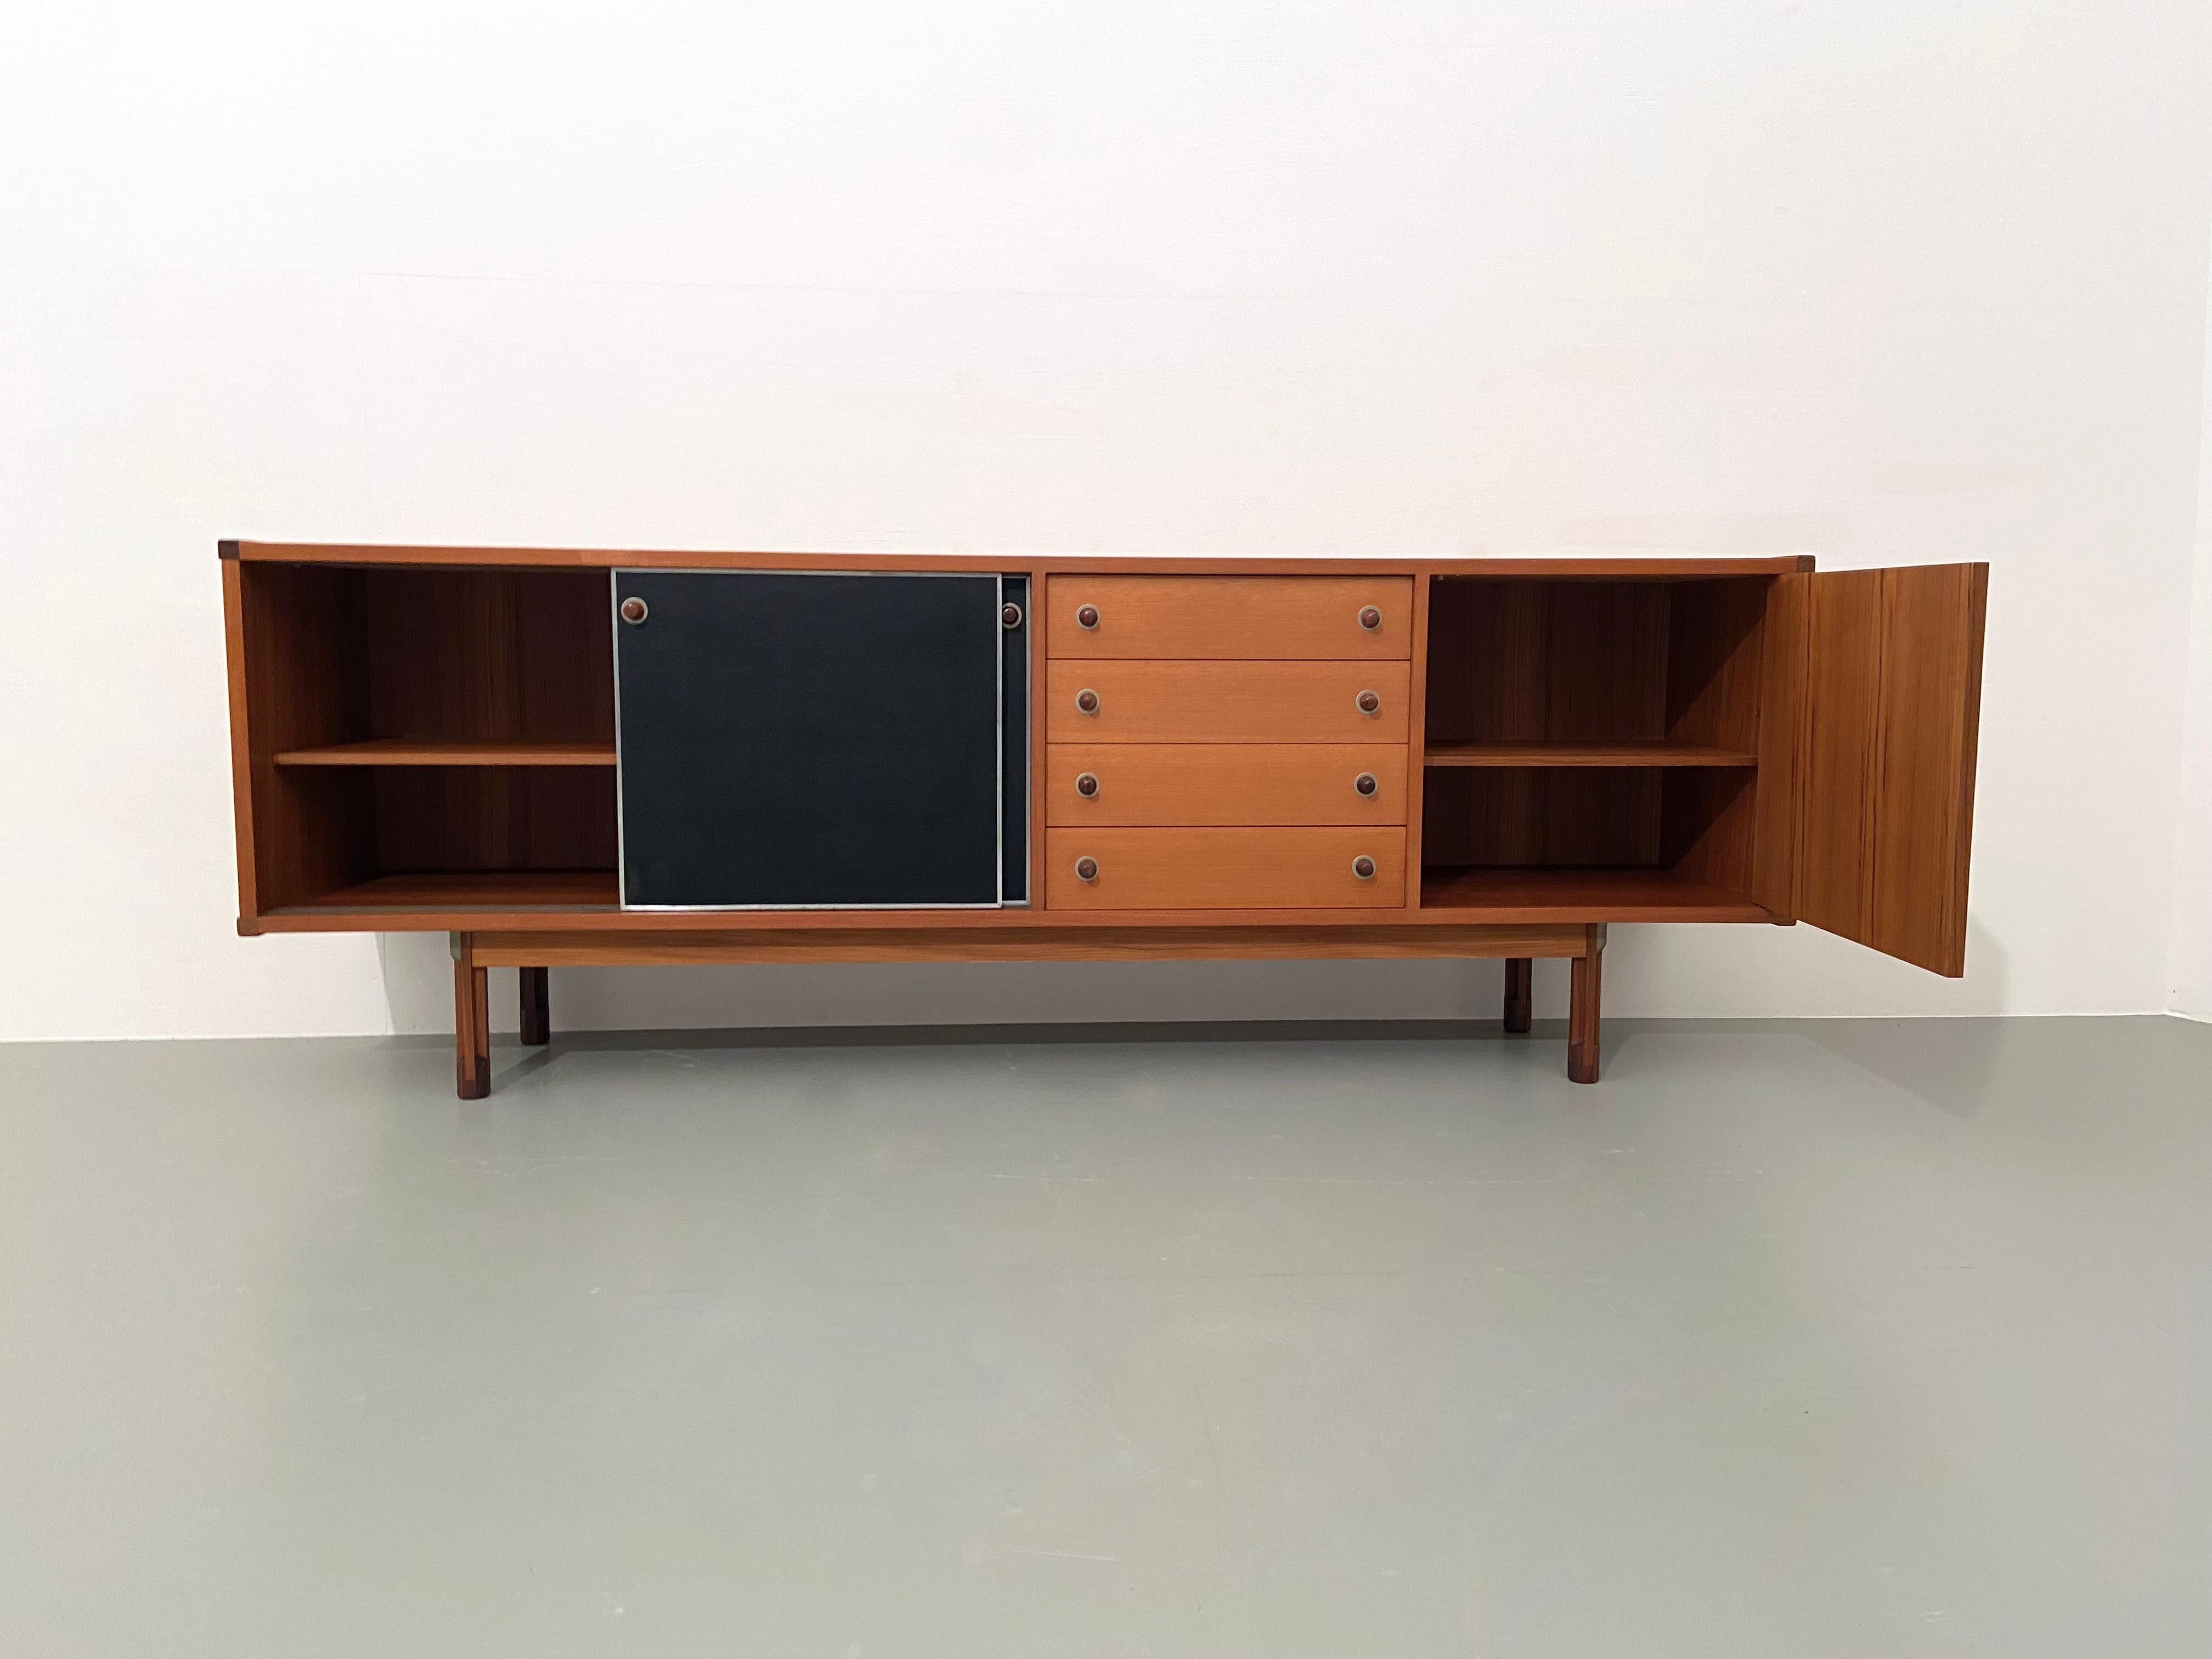 Large Cabinet in Teak and Black Laminate by Elam, Italy, 1960's For Sale 1